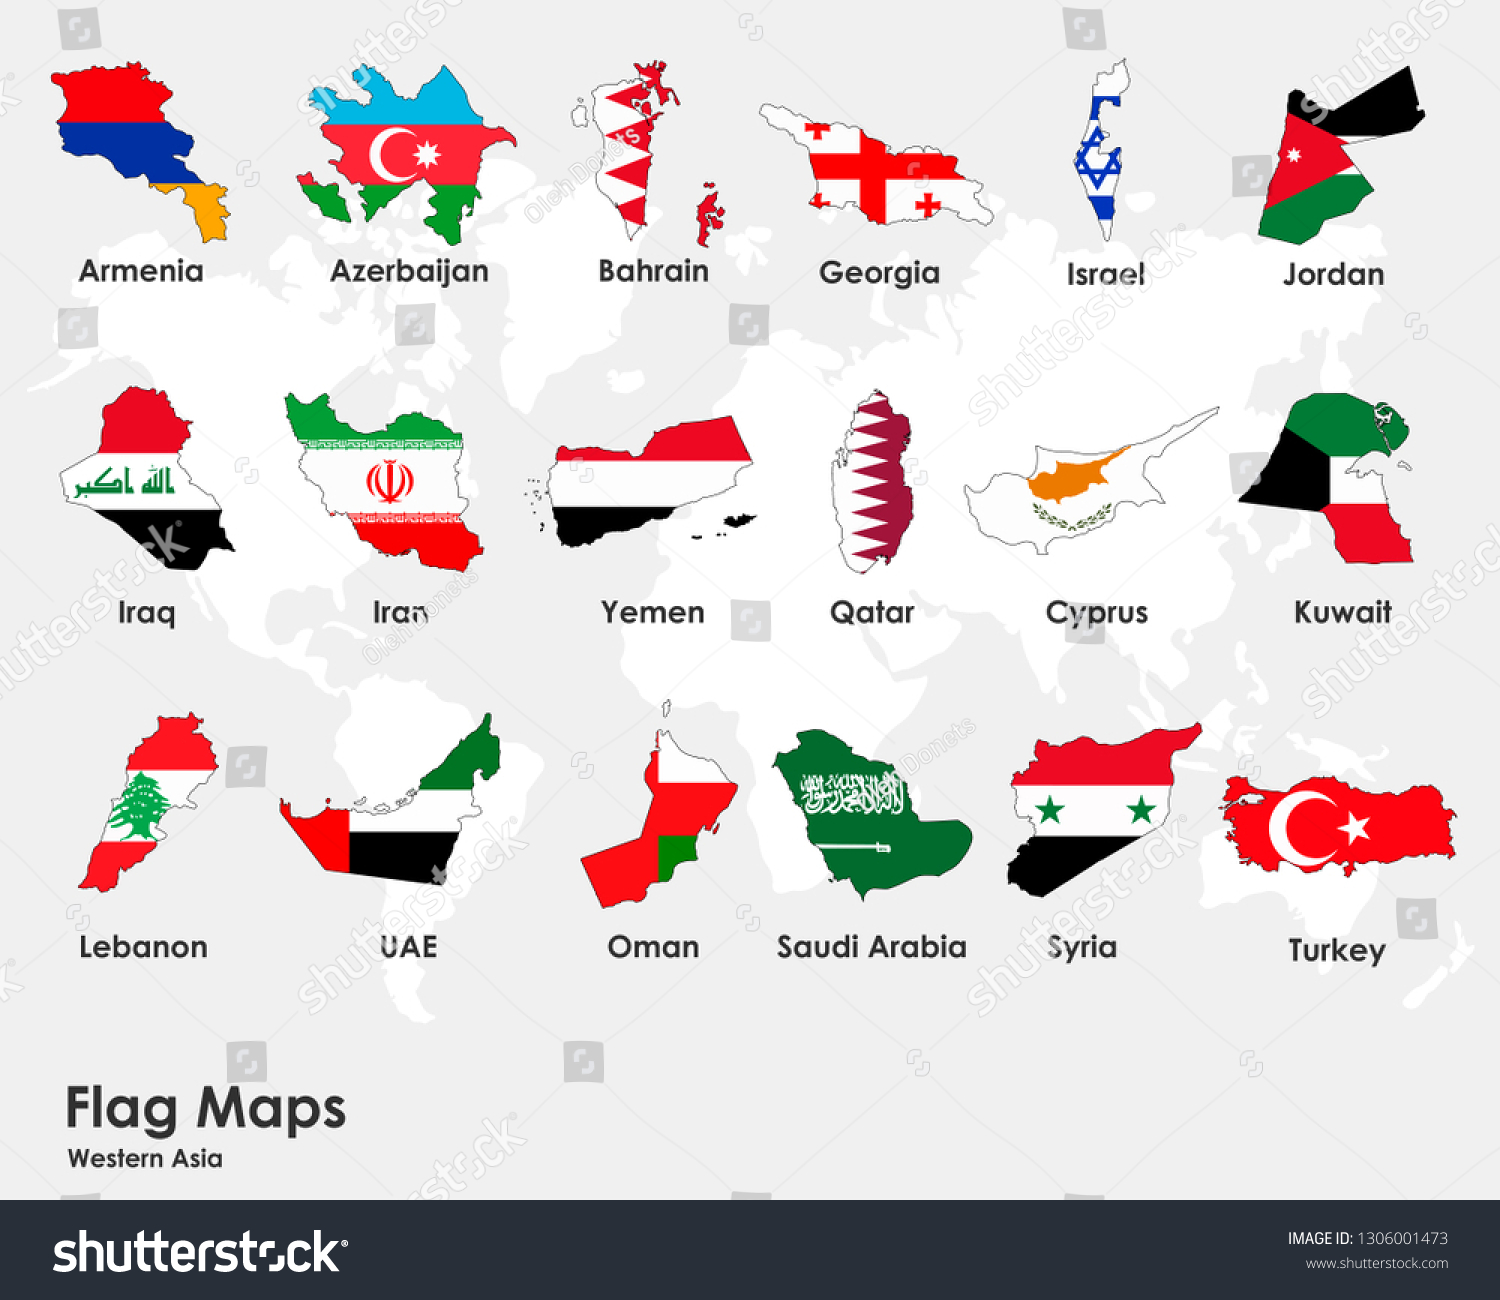 Western asia county maps flag assembly - Royalty Free Stock Vector ...